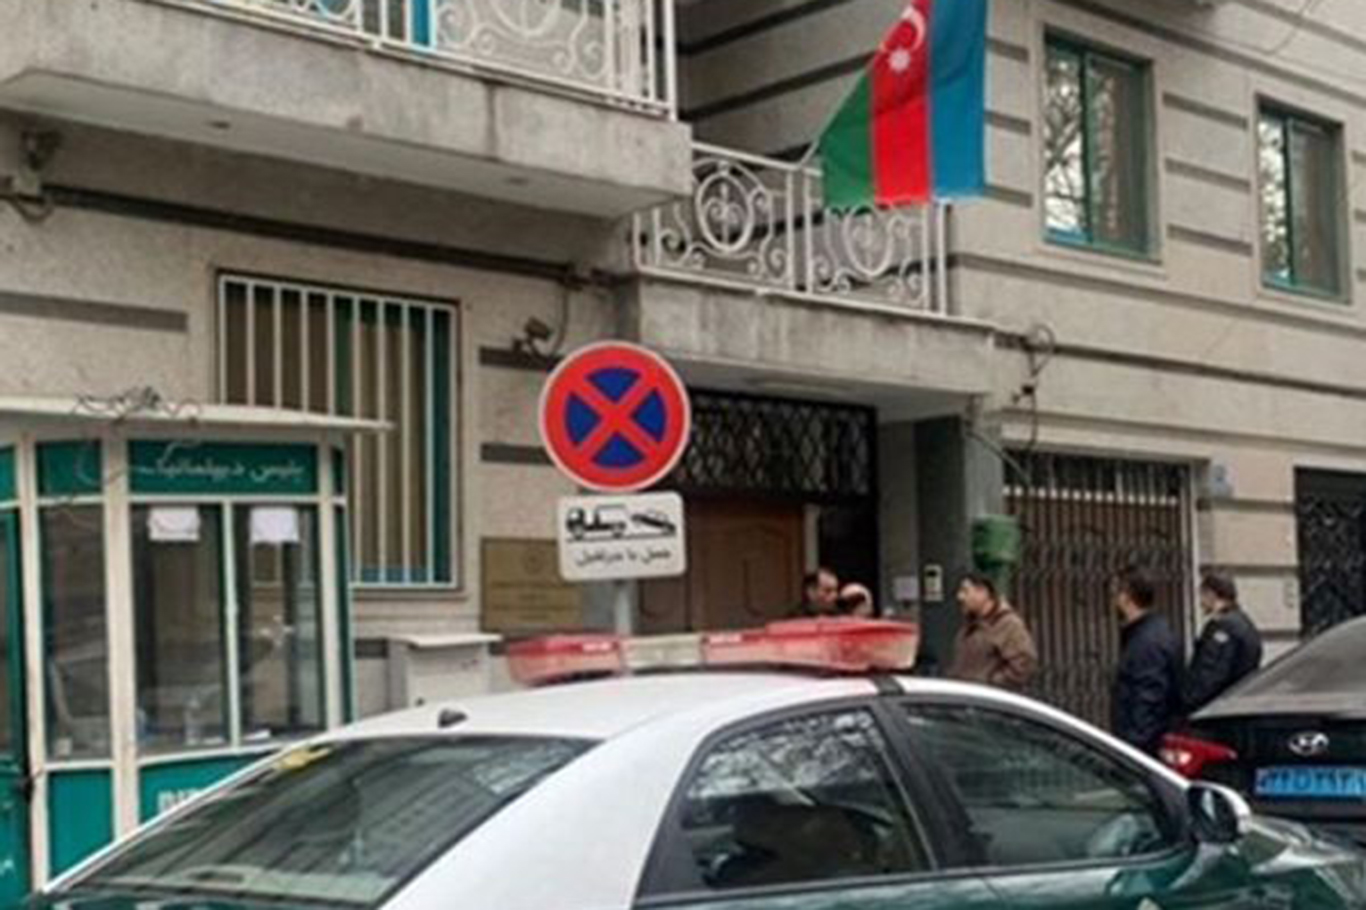 Azerbaijan completely suspends Tehran embassy operations after armed attack